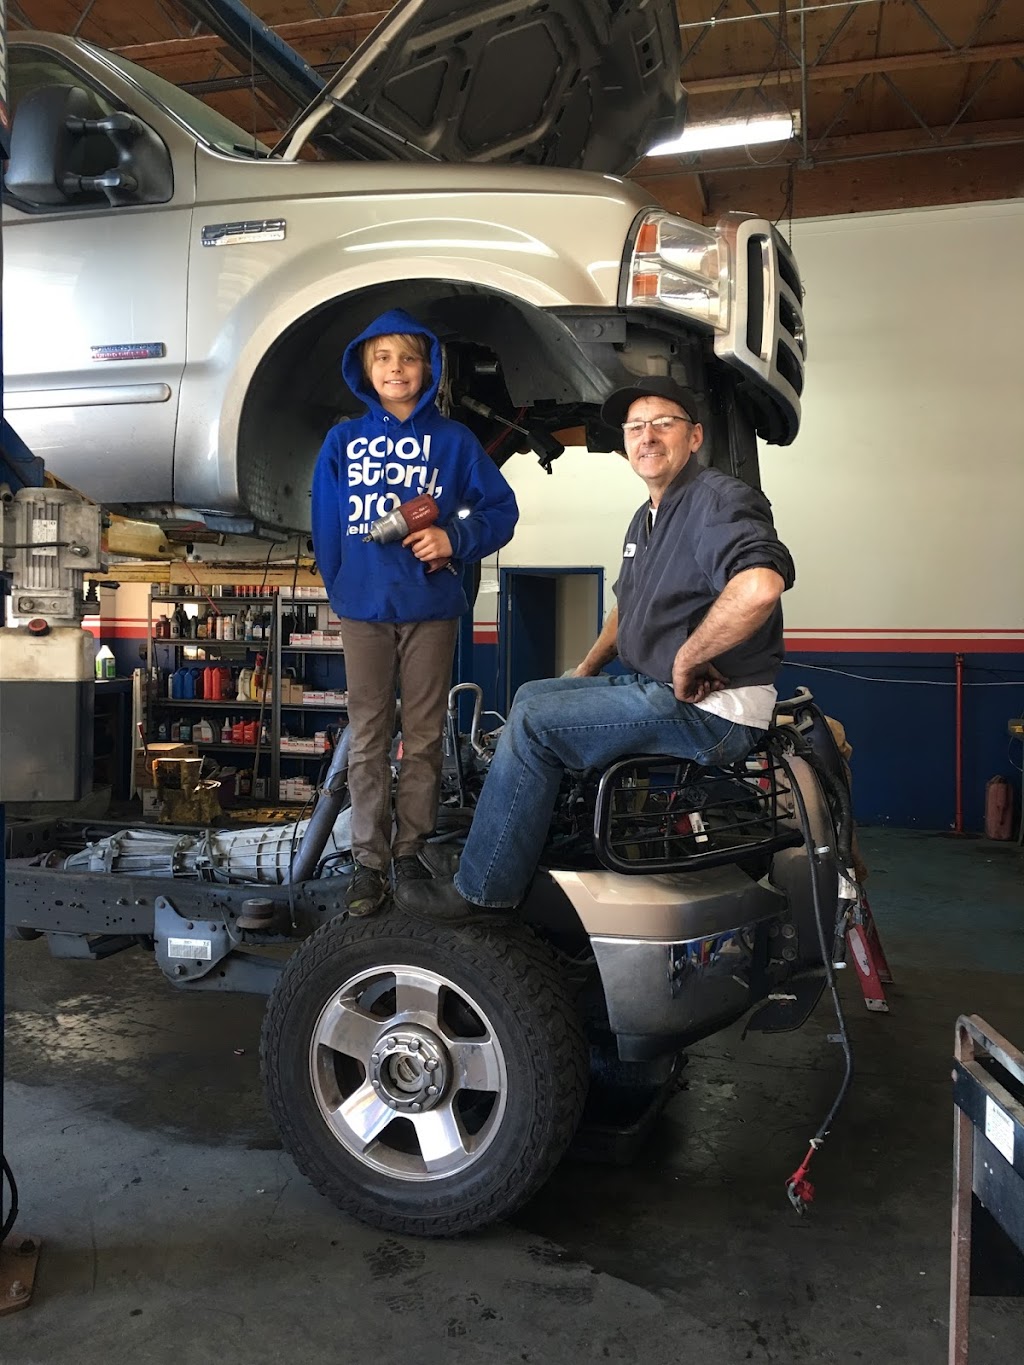 All Karz Automotive & Exhaust | 1042 Palmetto Ave, Pacifica, CA 94044 | Phone: (650) 359-2977